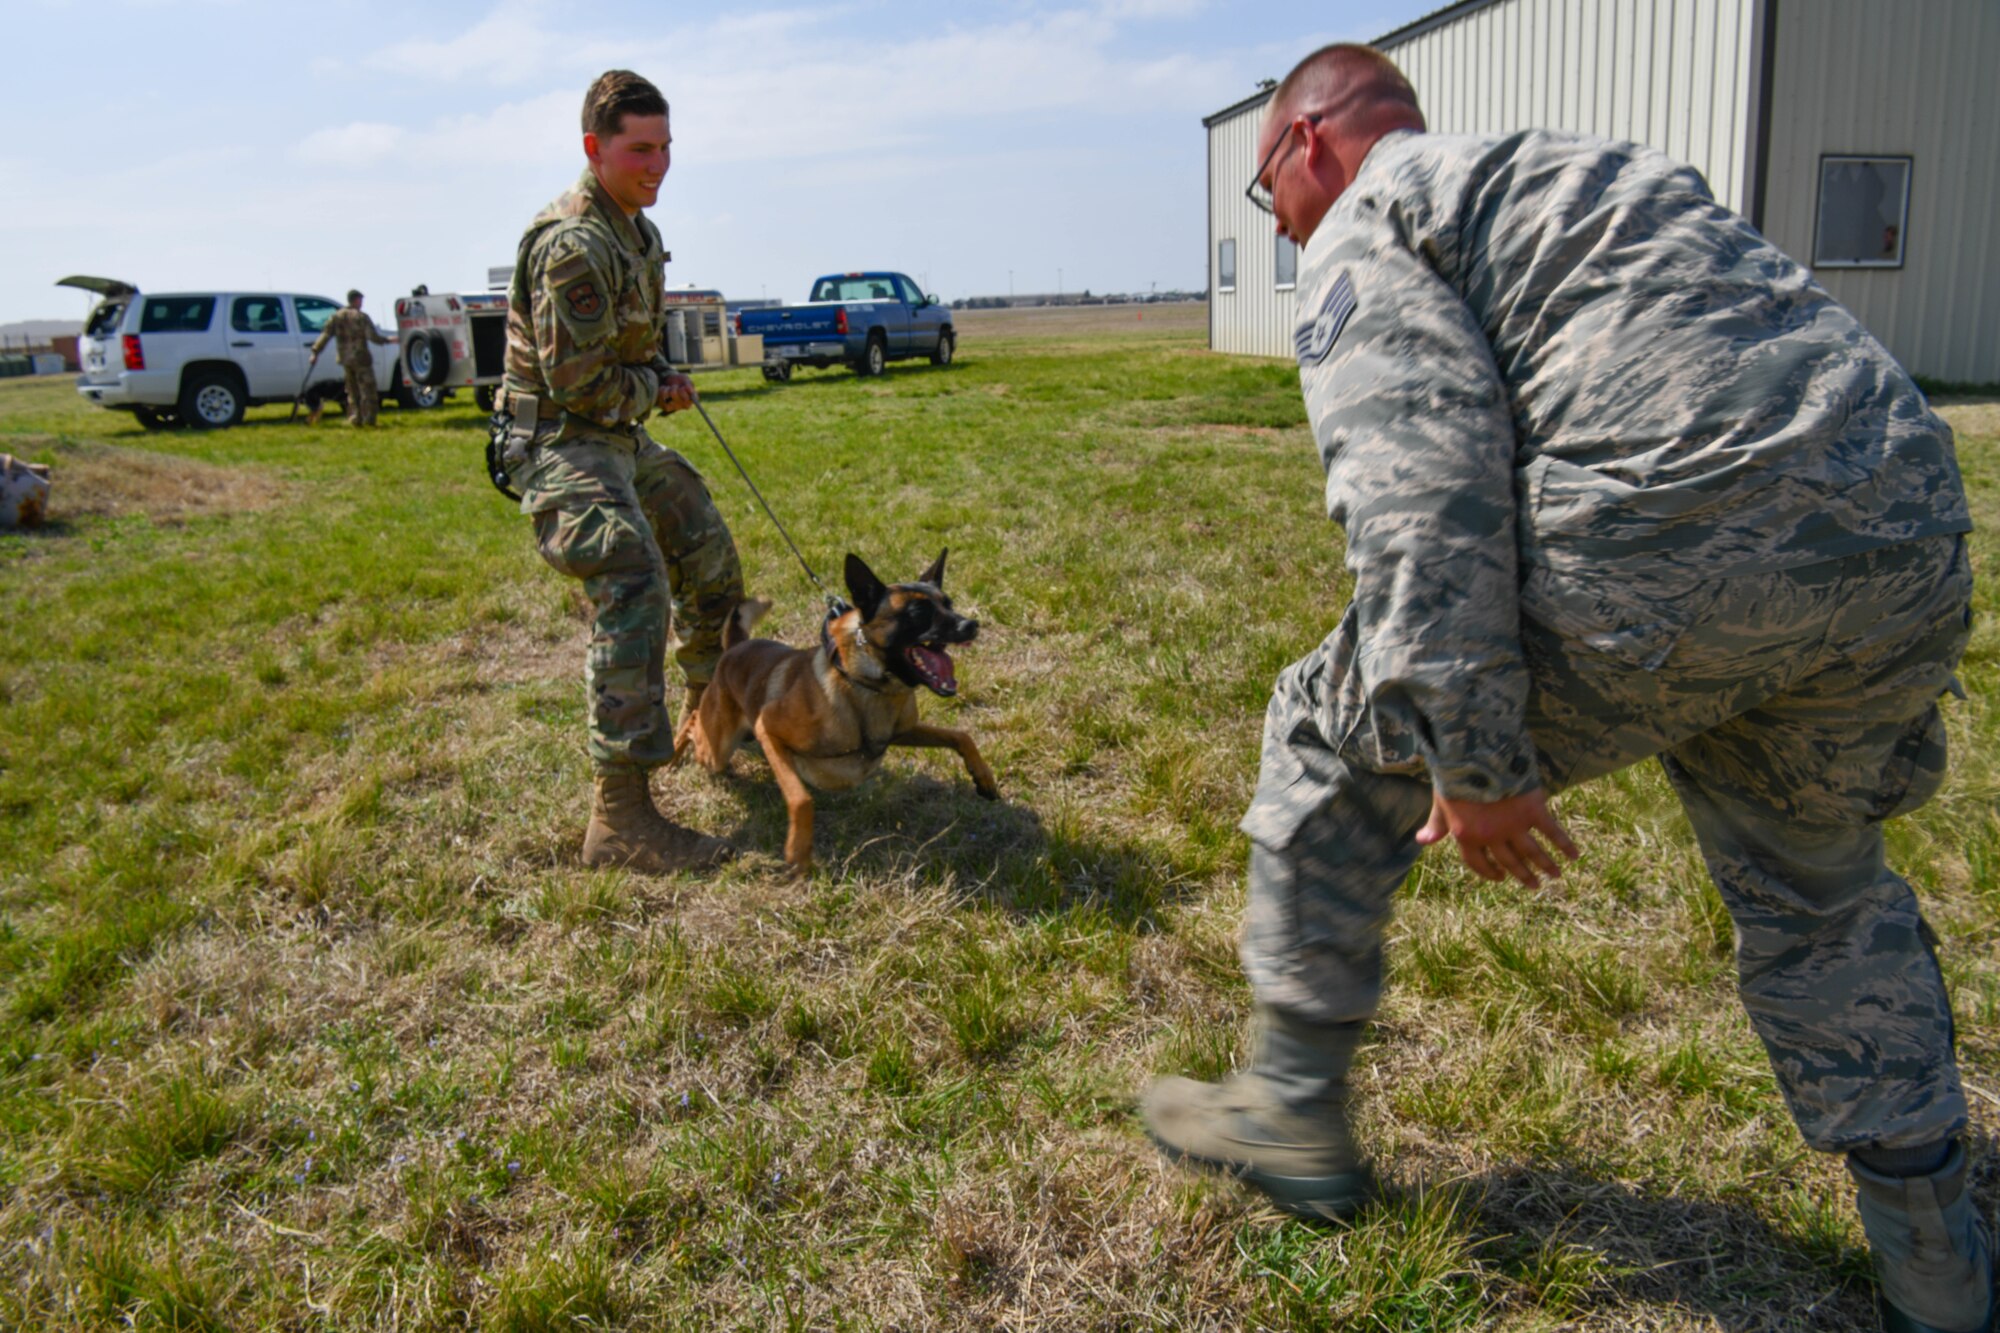 U.S. Air Force Senior Airman Russell Ferguson, dog handler assigned to 97th Security Forces Squadron, holds back his canine from a simulated aggressor, Mar. 29, 2019, at Altus Air Force Base, Okla. Military working dogs are trained daily to learn to encounter threats and dangerous situations.  (U.S. Air Force photo by Airman First Class Dallin Wrye)